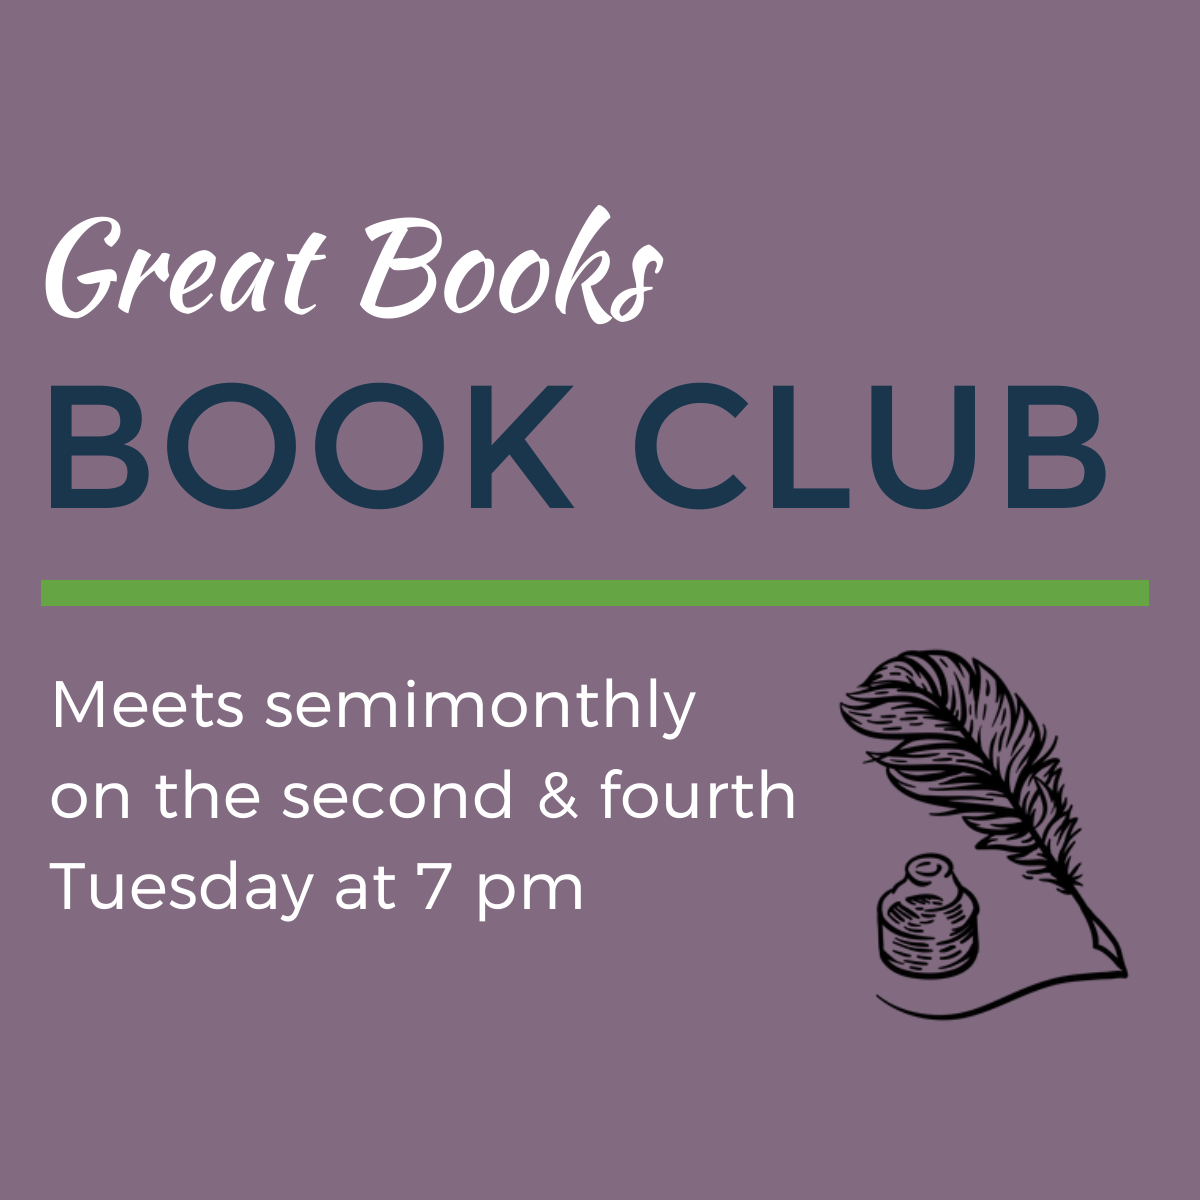 Great Books Book Club Meets semimonthly on the 2nd and 4th Tuesdays at 7 pm